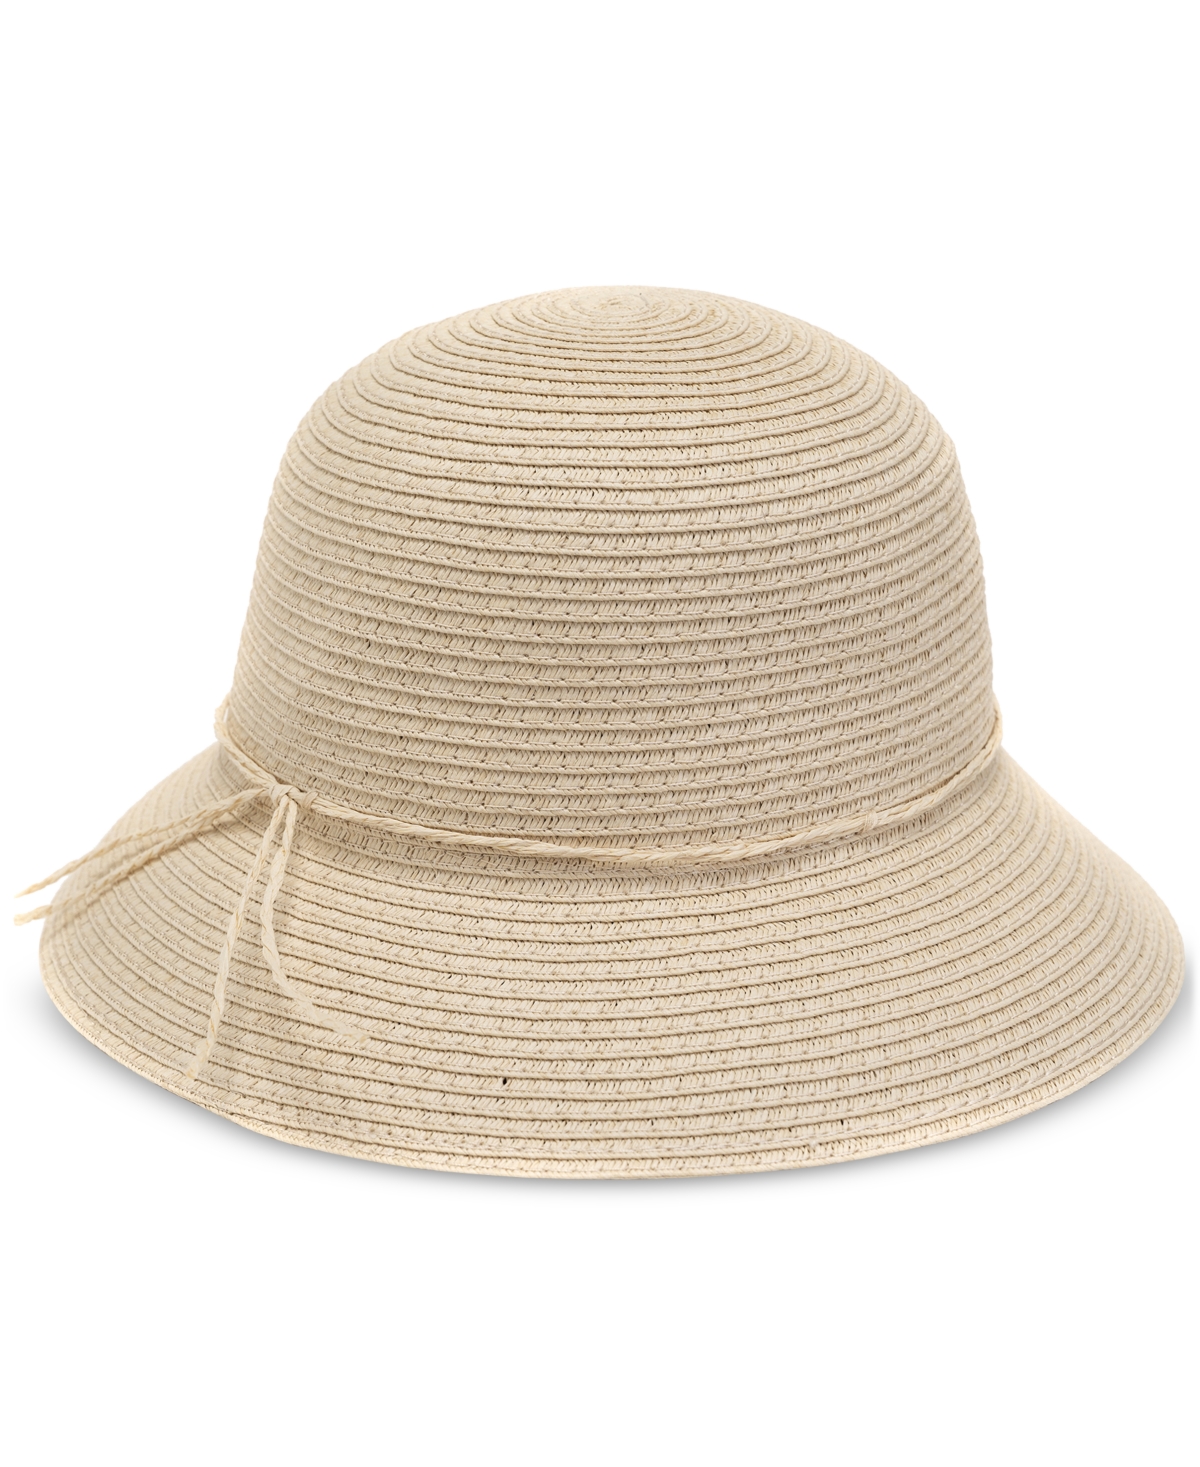 Women's Packable Straw Cloche Hat, Created for Macy's - White